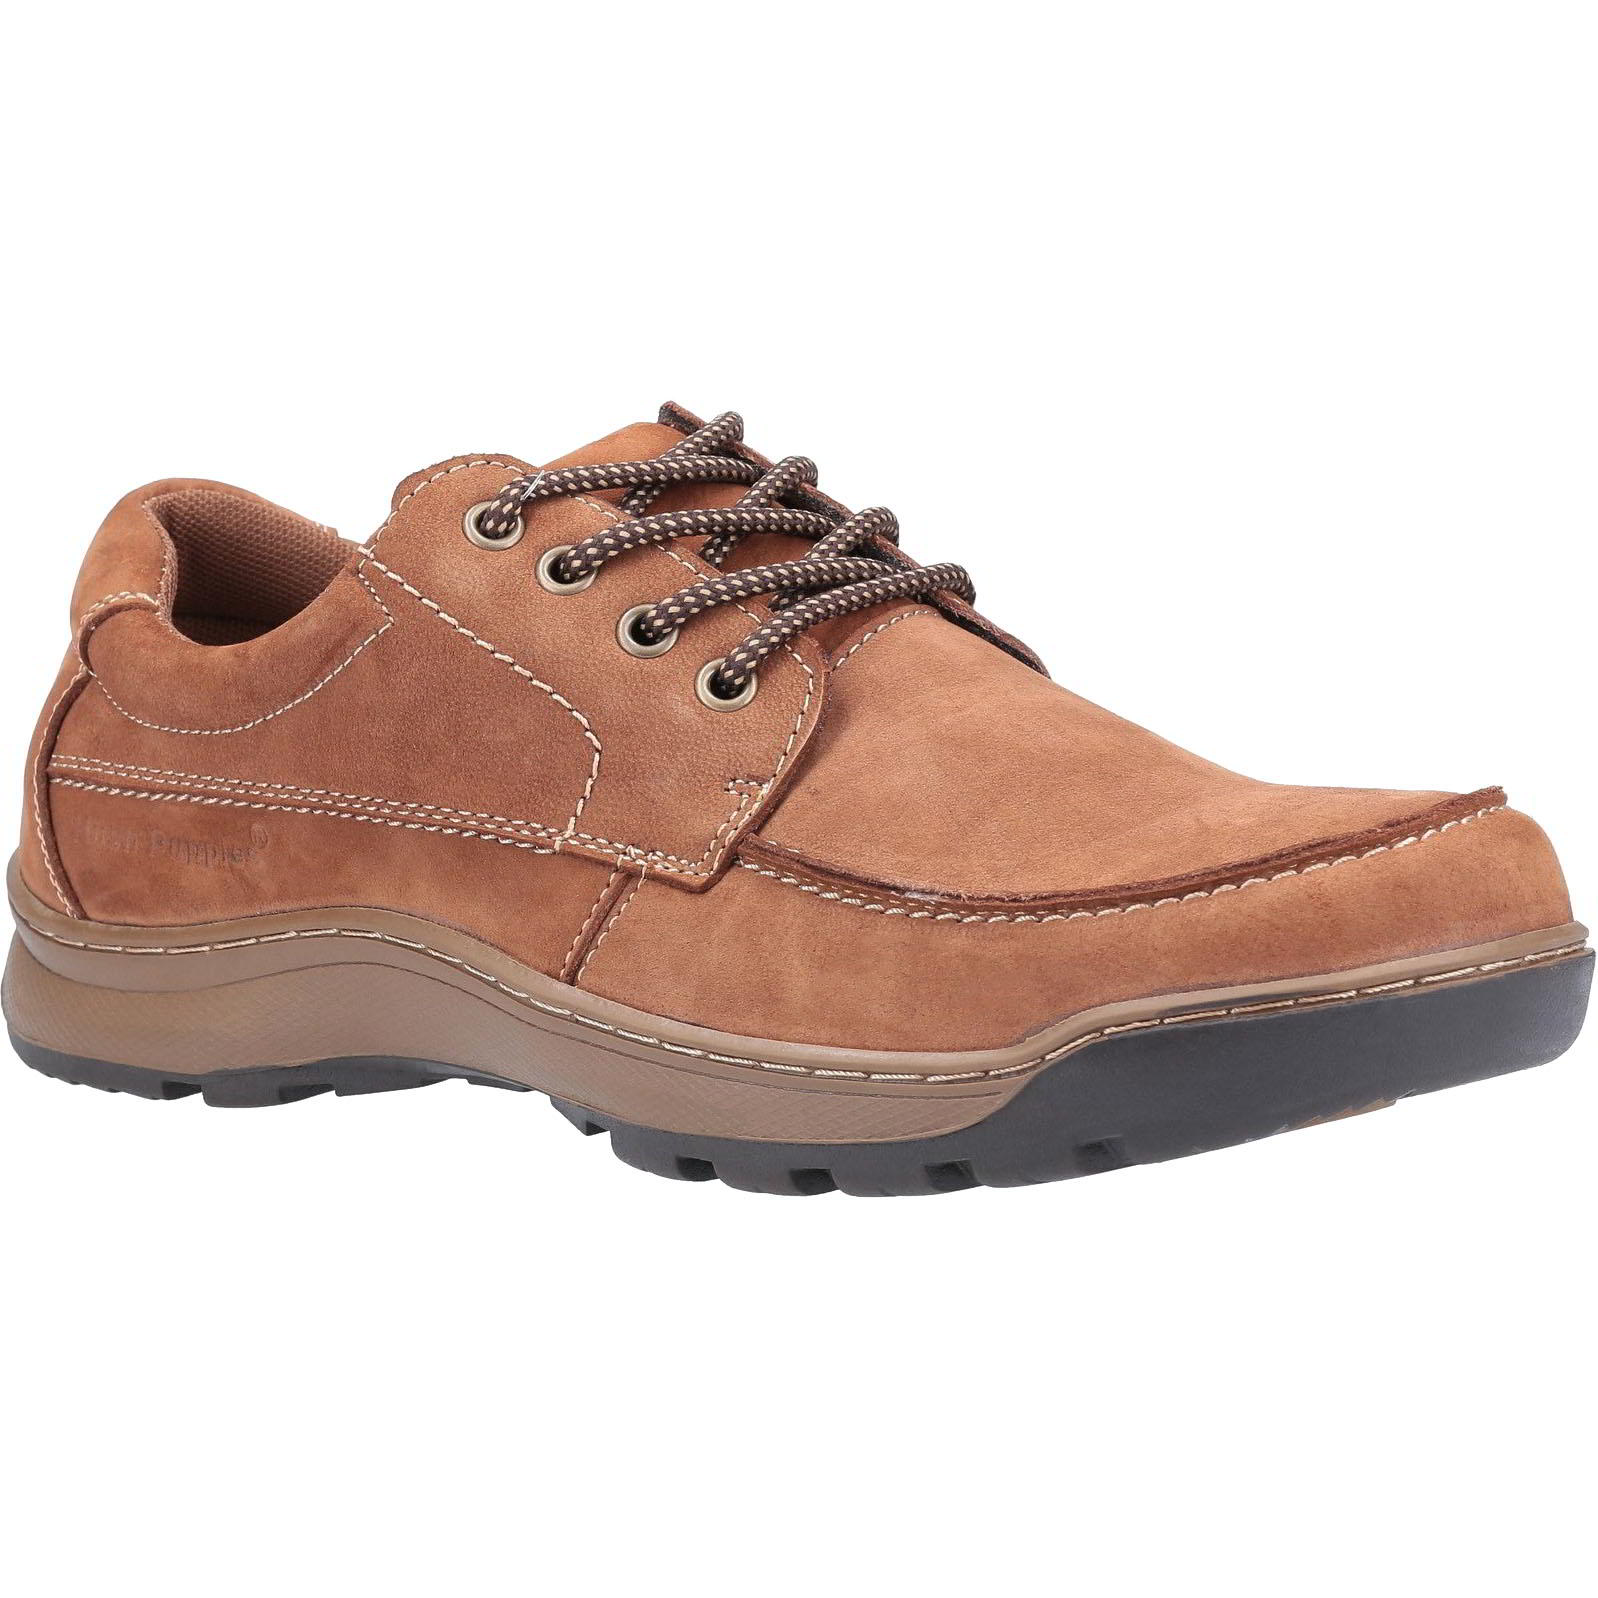 Hush Puppies Men's Tucker Leather Lace Up Shoes - UK 11